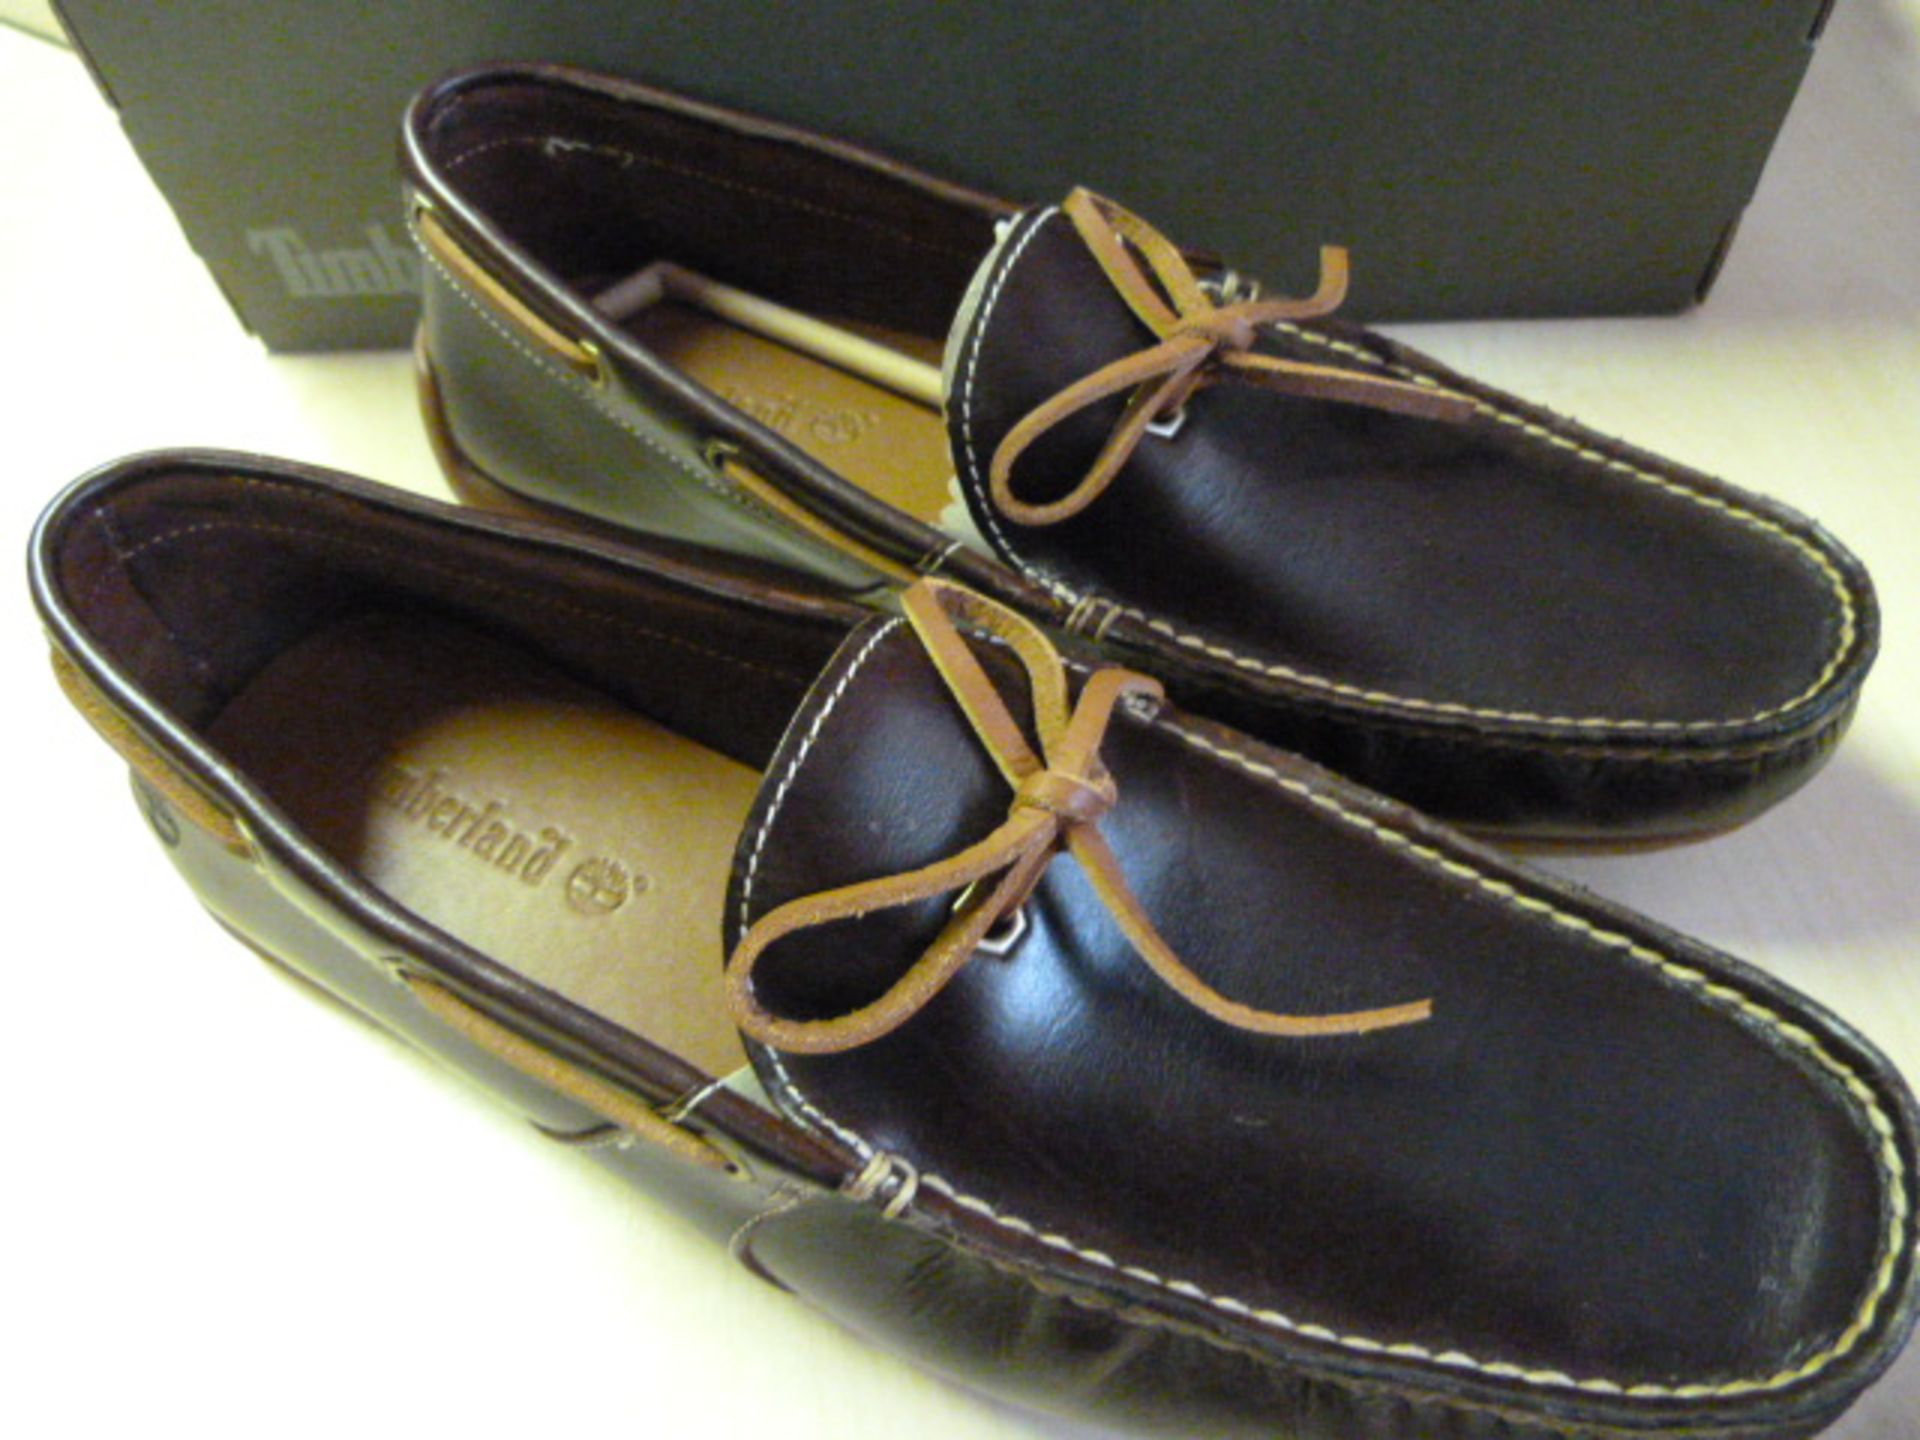 *Timberland Toe Boat Shoes Size: 8.5